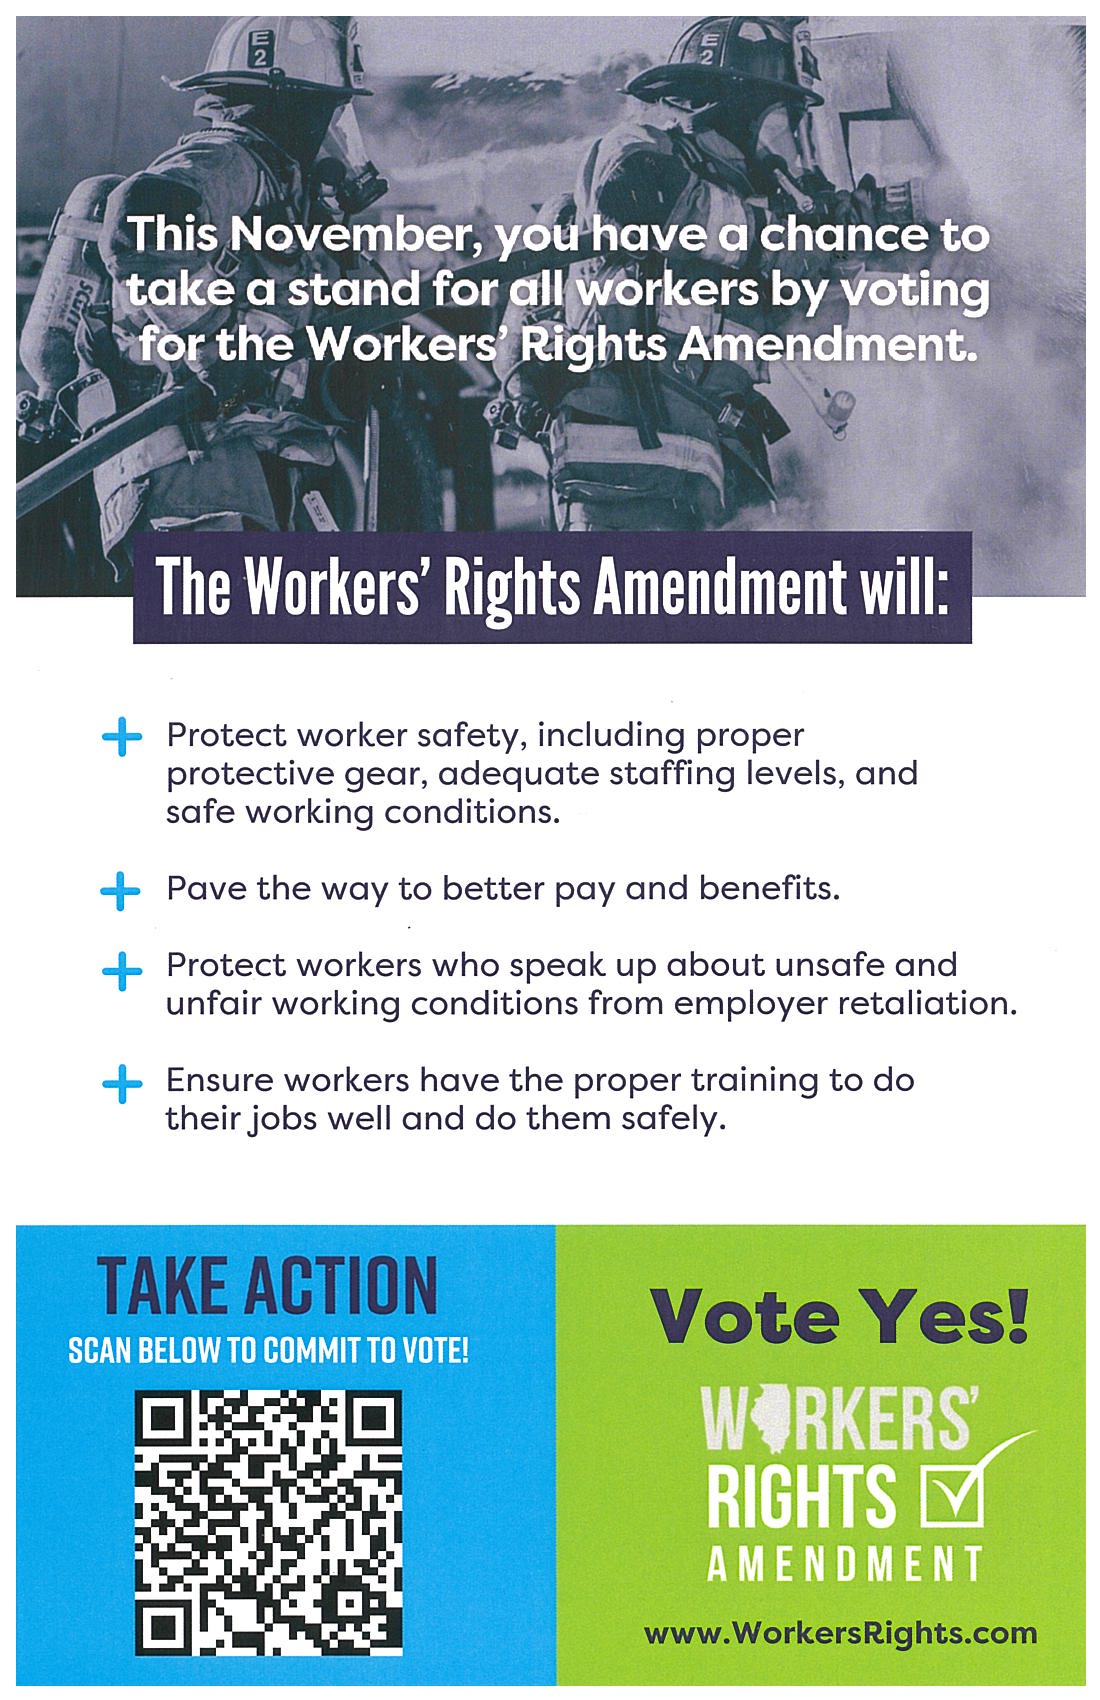 vote yes for workers rights_Page_2